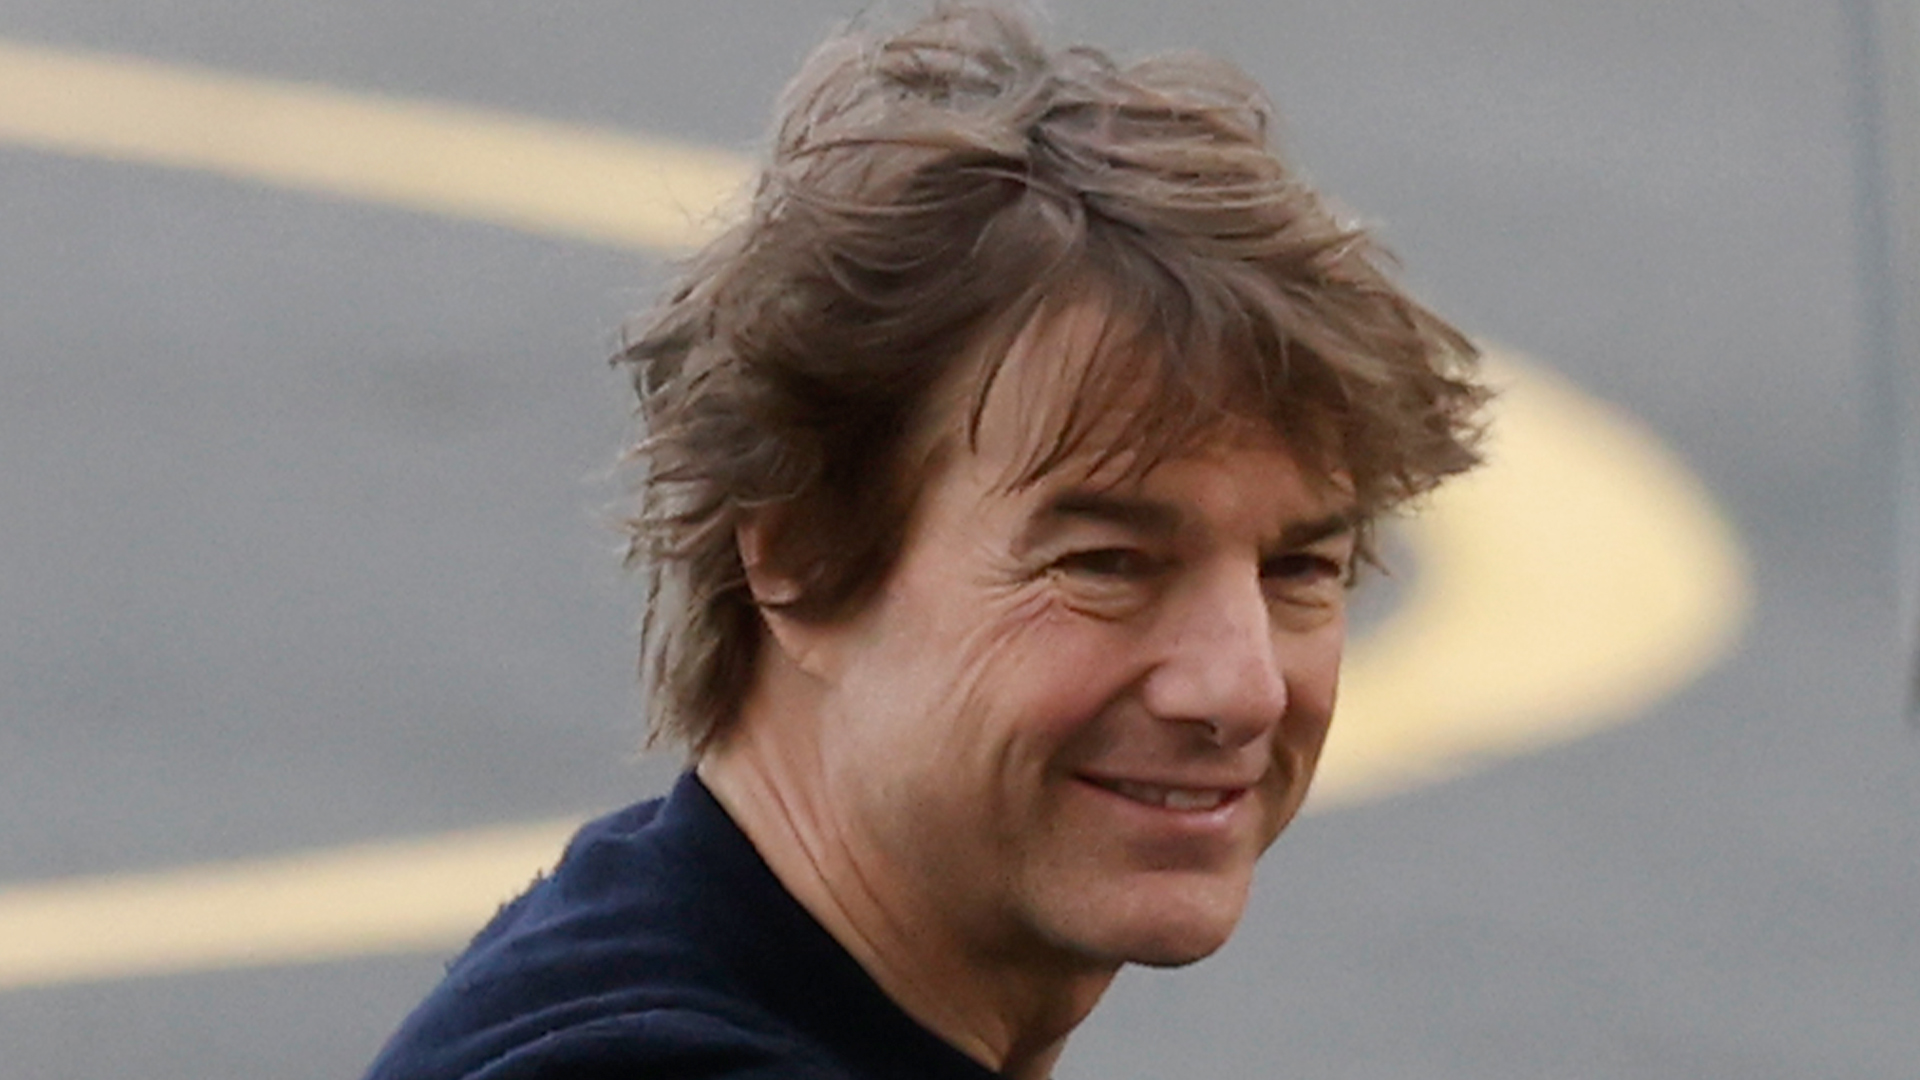 Tom Cruise spotted sporting his Mop Gun hairdo and flashes big grin for the cameras while arriving at heliport in London